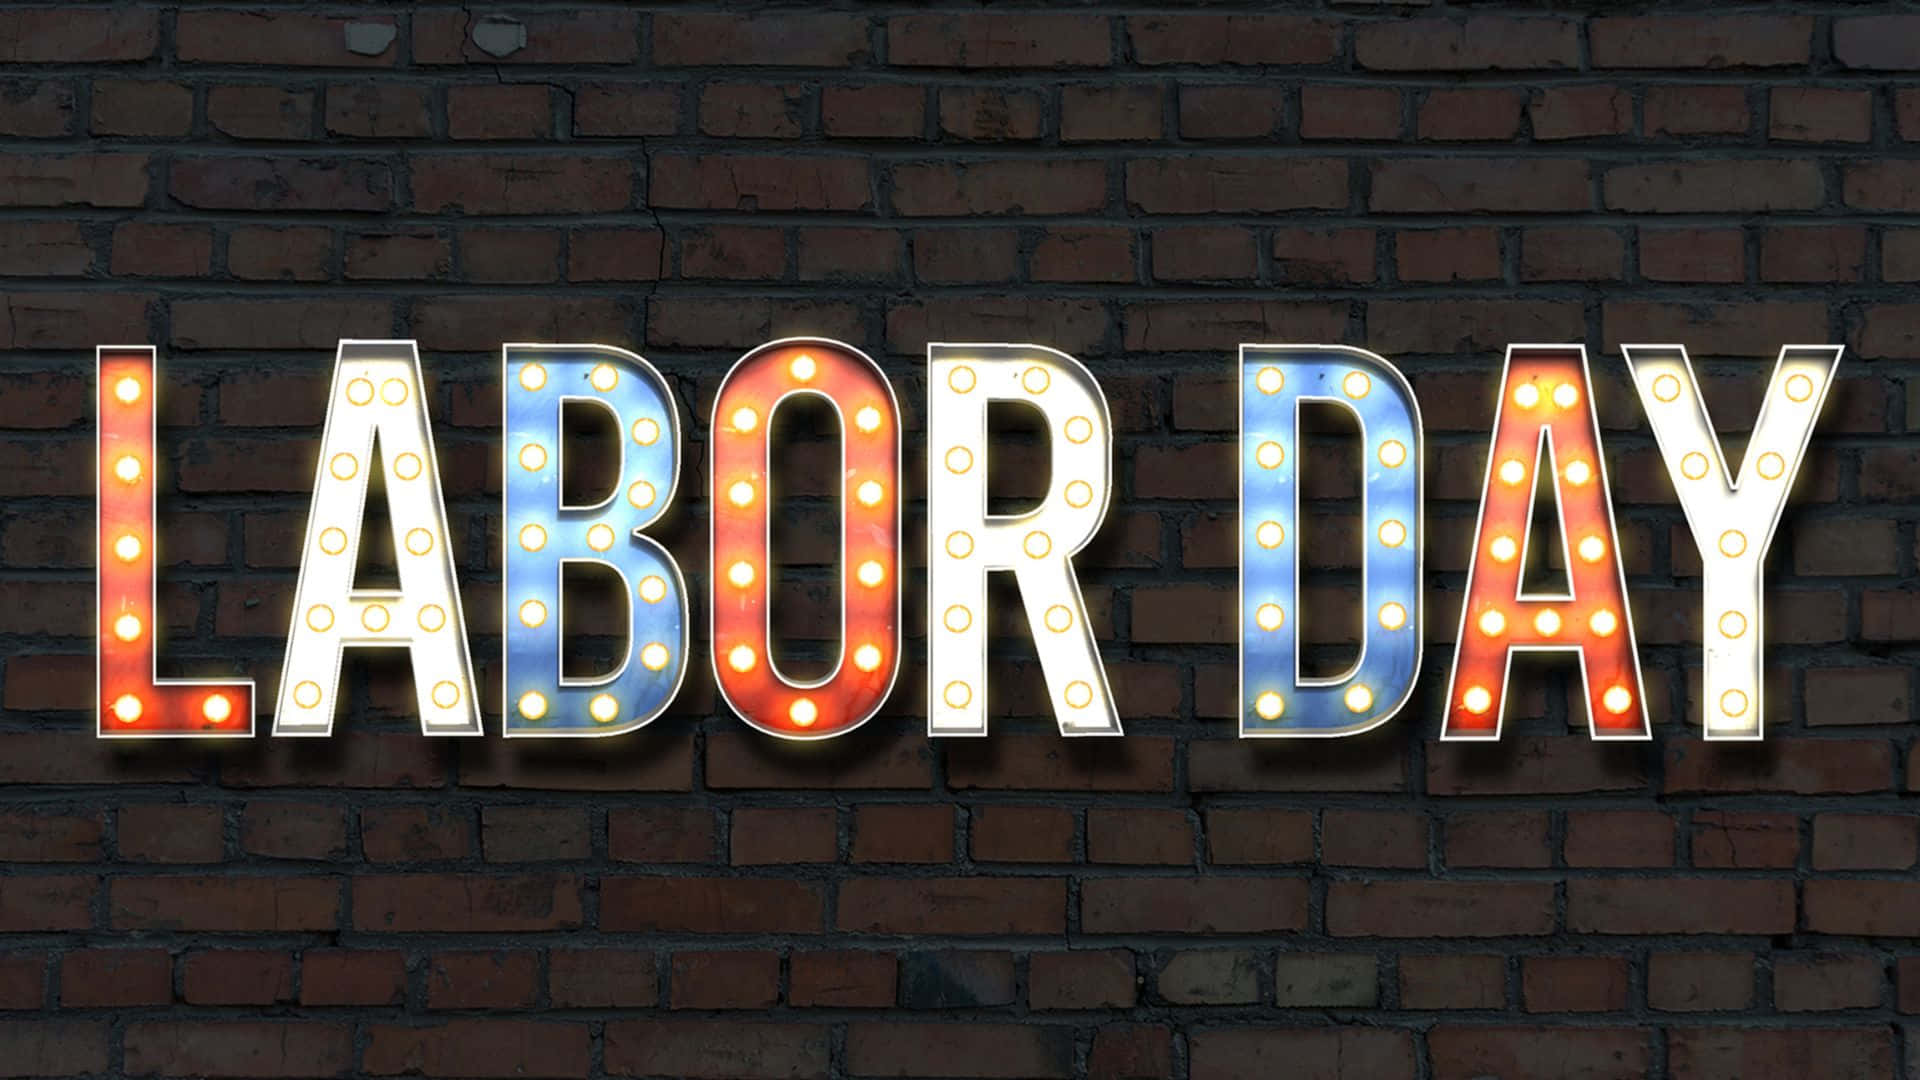 Celebrating Labor Day with an artistic flag-themed background